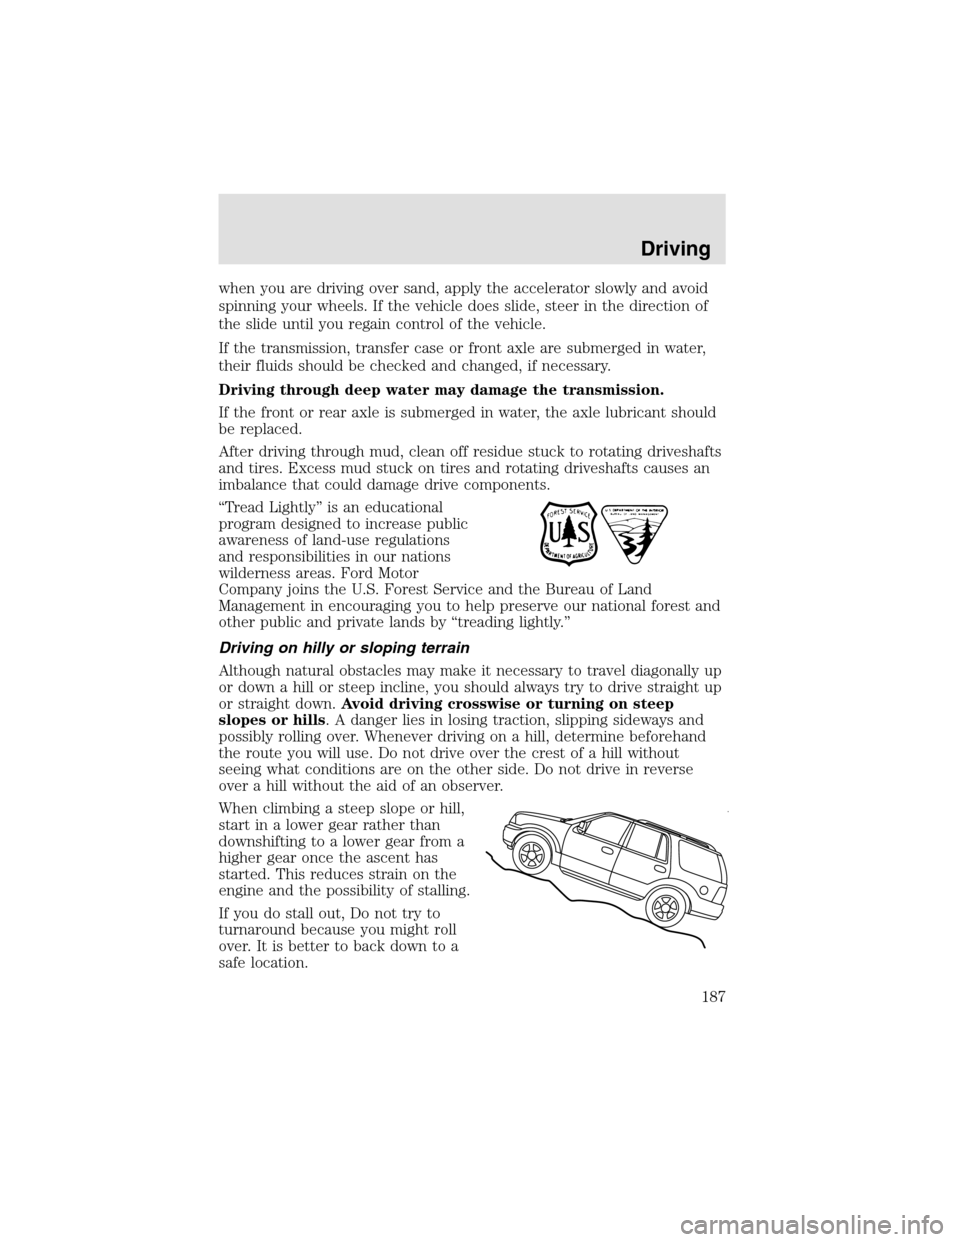 LINCOLN AVIATOR 2003 User Guide when you are driving over sand, apply the accelerator slowly and avoid
spinning your wheels. If the vehicle does slide, steer in the direction of
the slide until you regain control of the vehicle.
If 